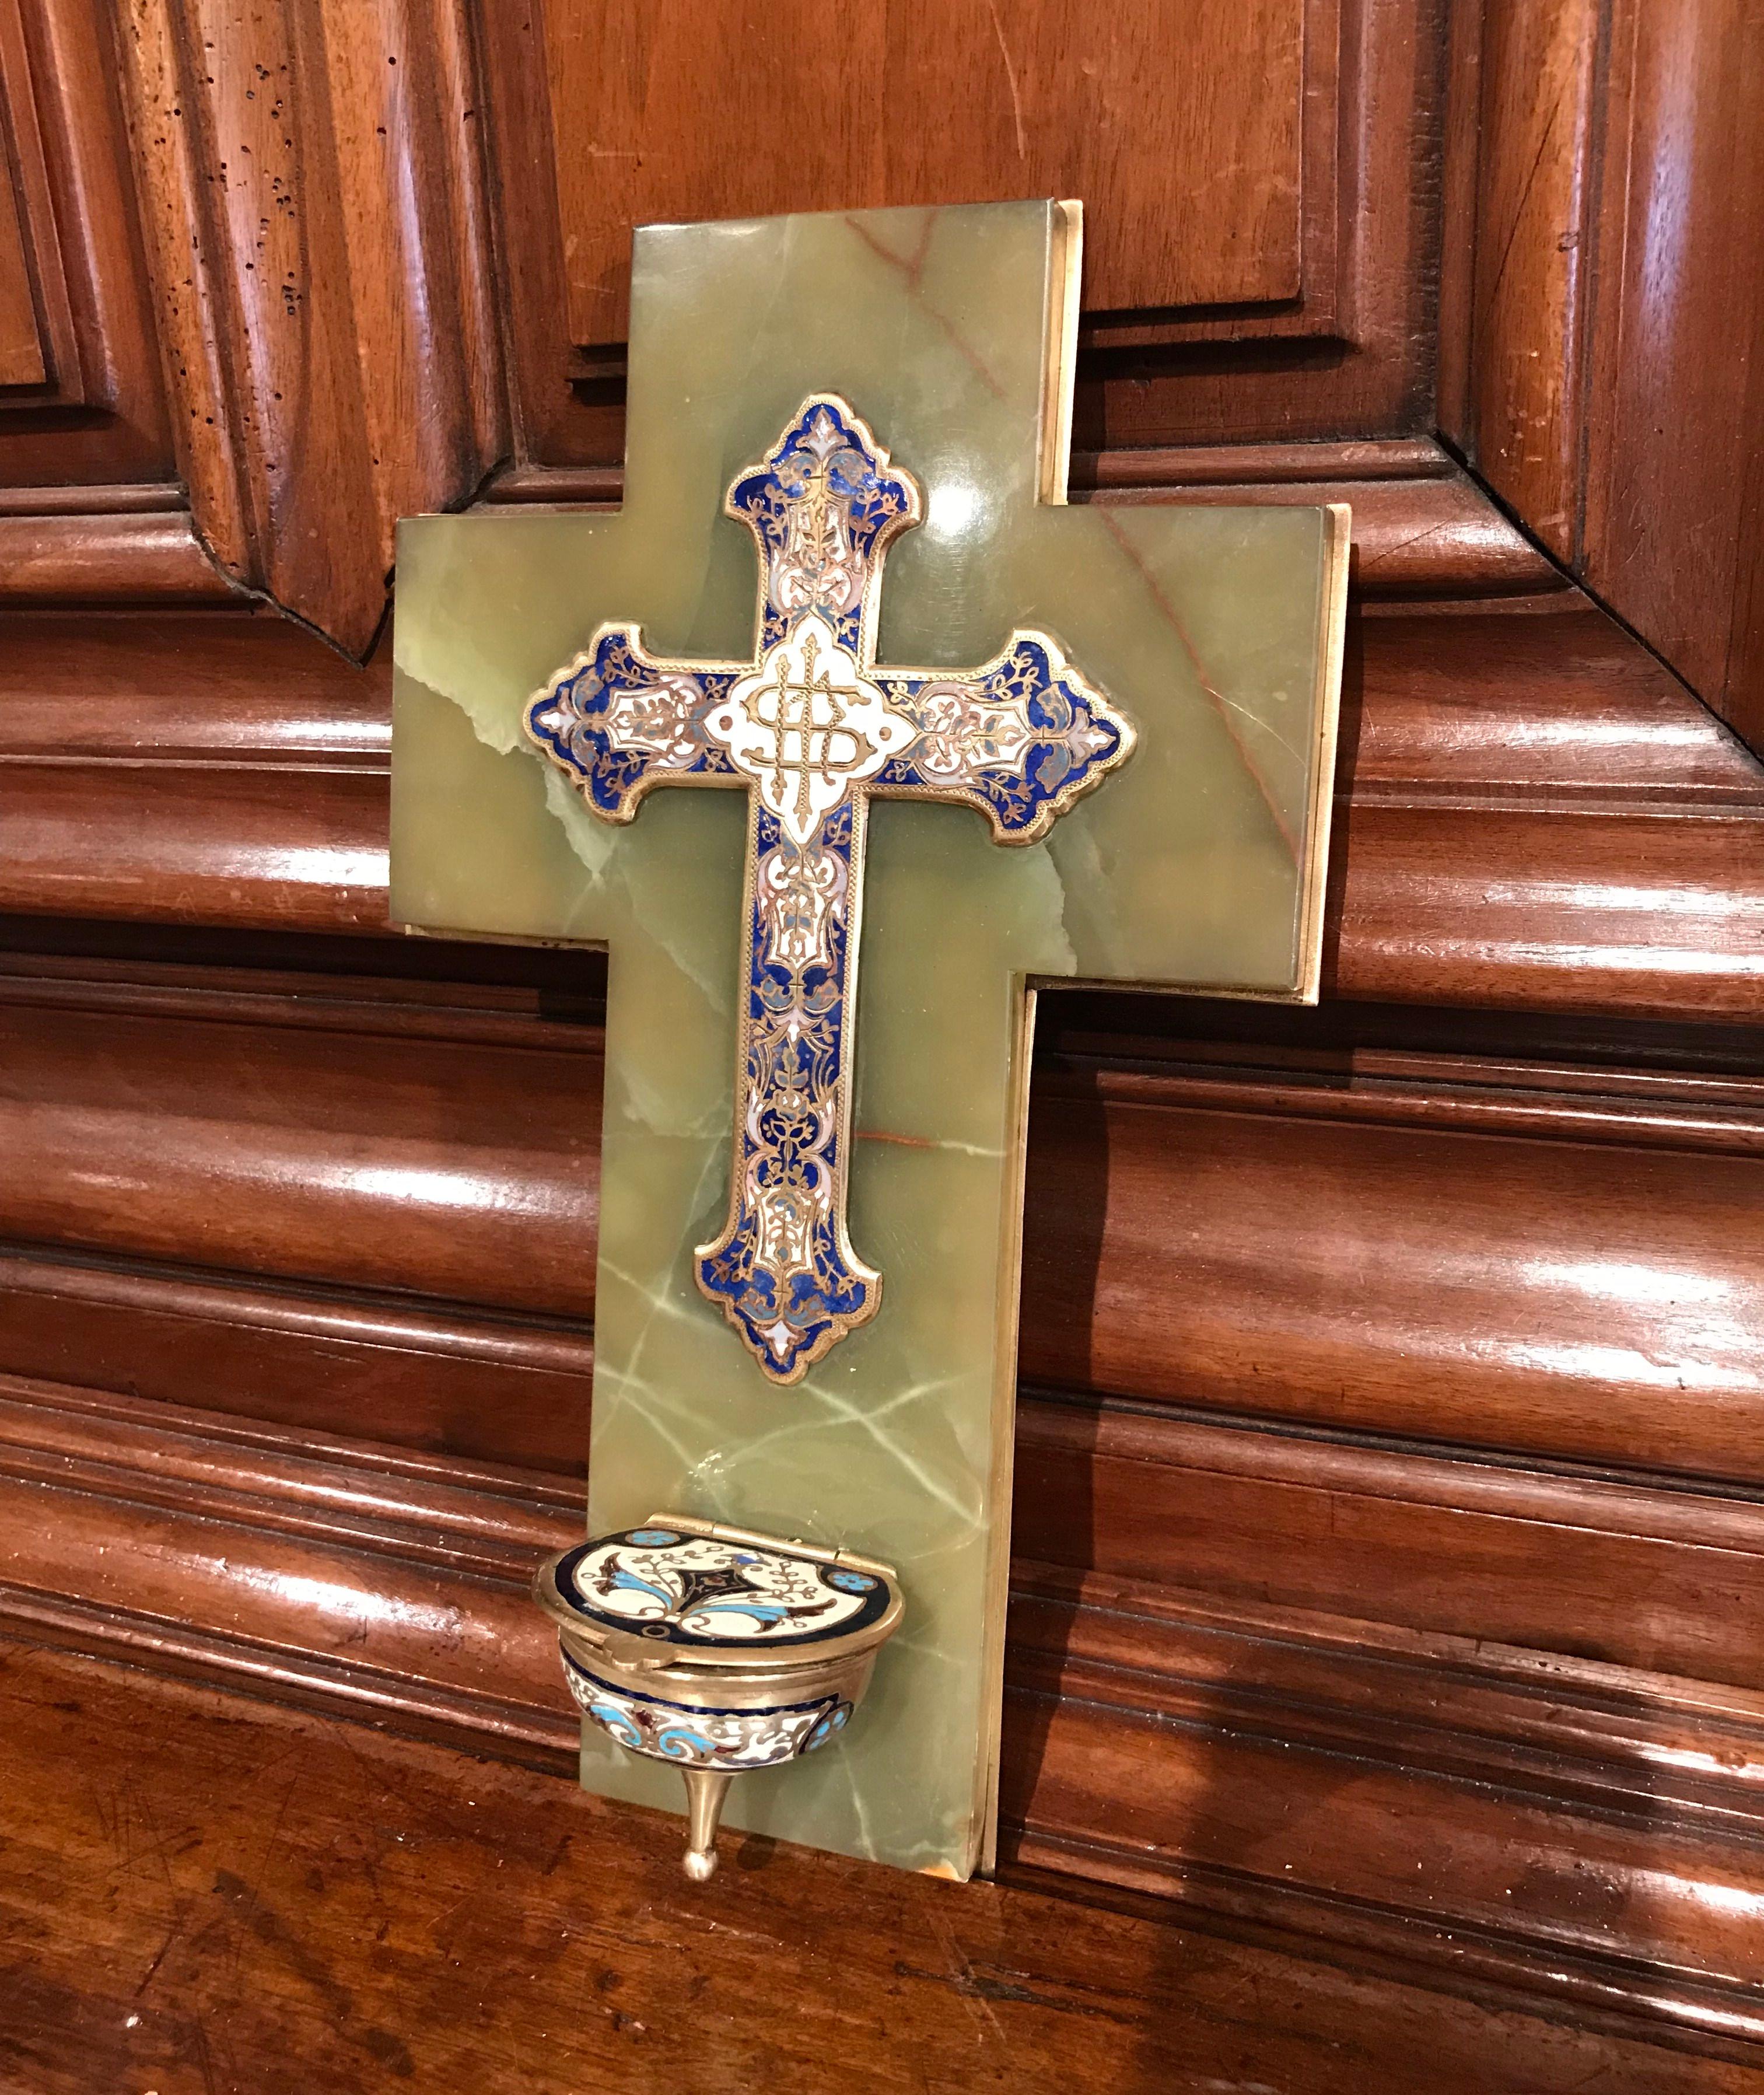 This large marble and bronze cross with holy water recipient was created in France, circa 1870. The antique piece features beautiful, intricate cloisonné work with enamel, stone and bronze and a gleaming green marble base. Cloisonné is an ancient